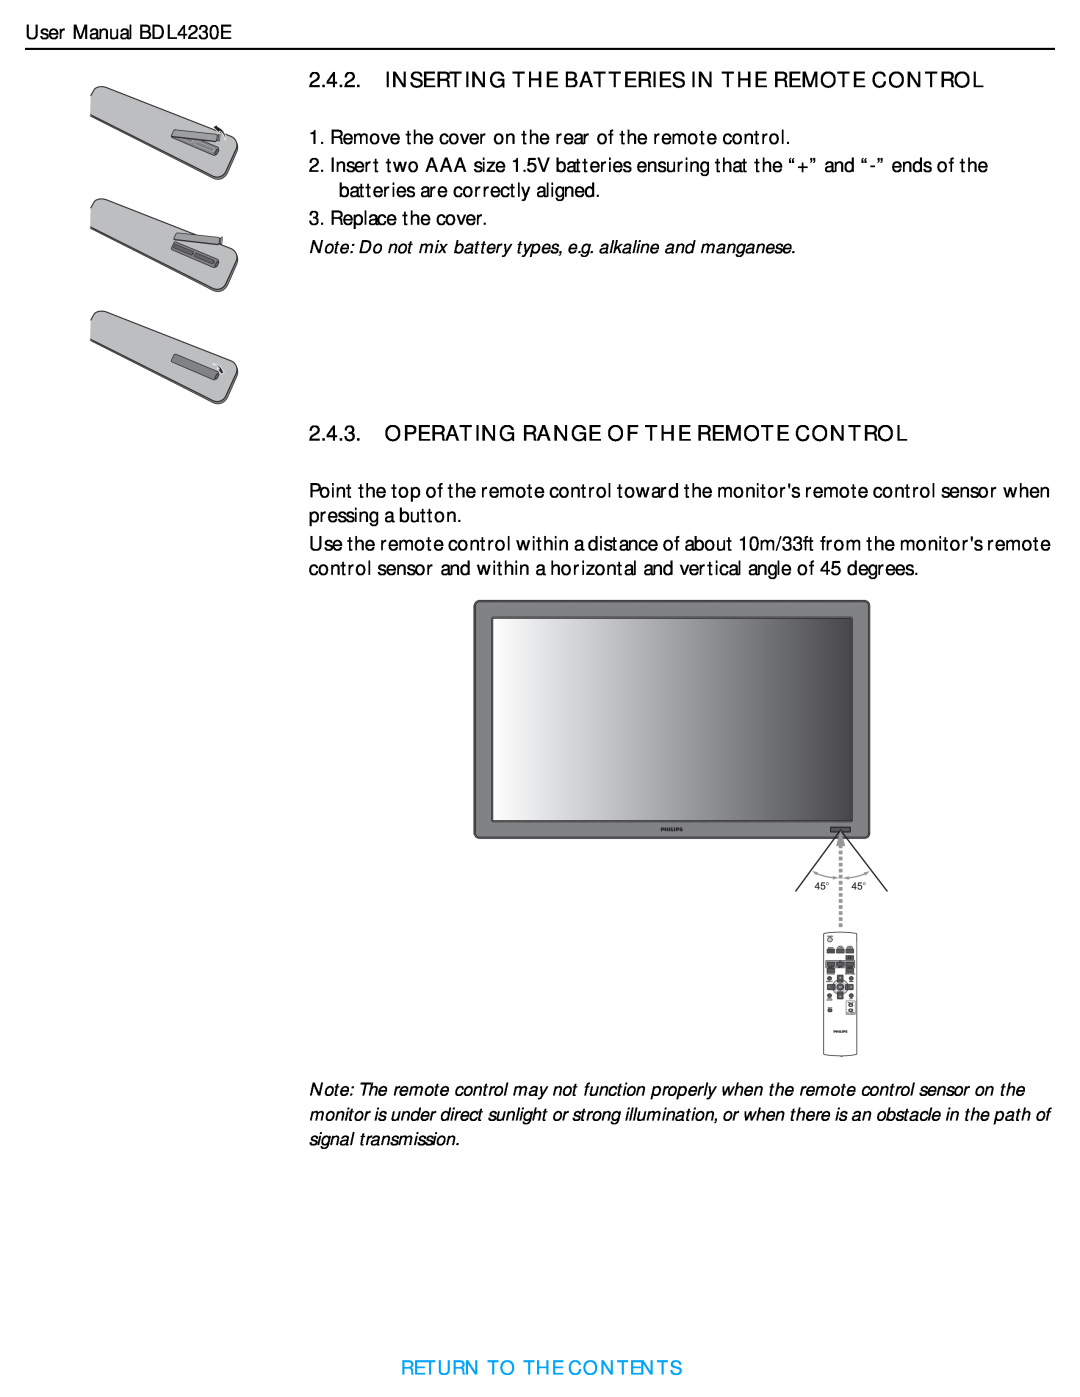 Philips BDL4230E Note Do not mix battery types, e.g. alkaline and manganese, Inserting The Batteries In The Remote Control 